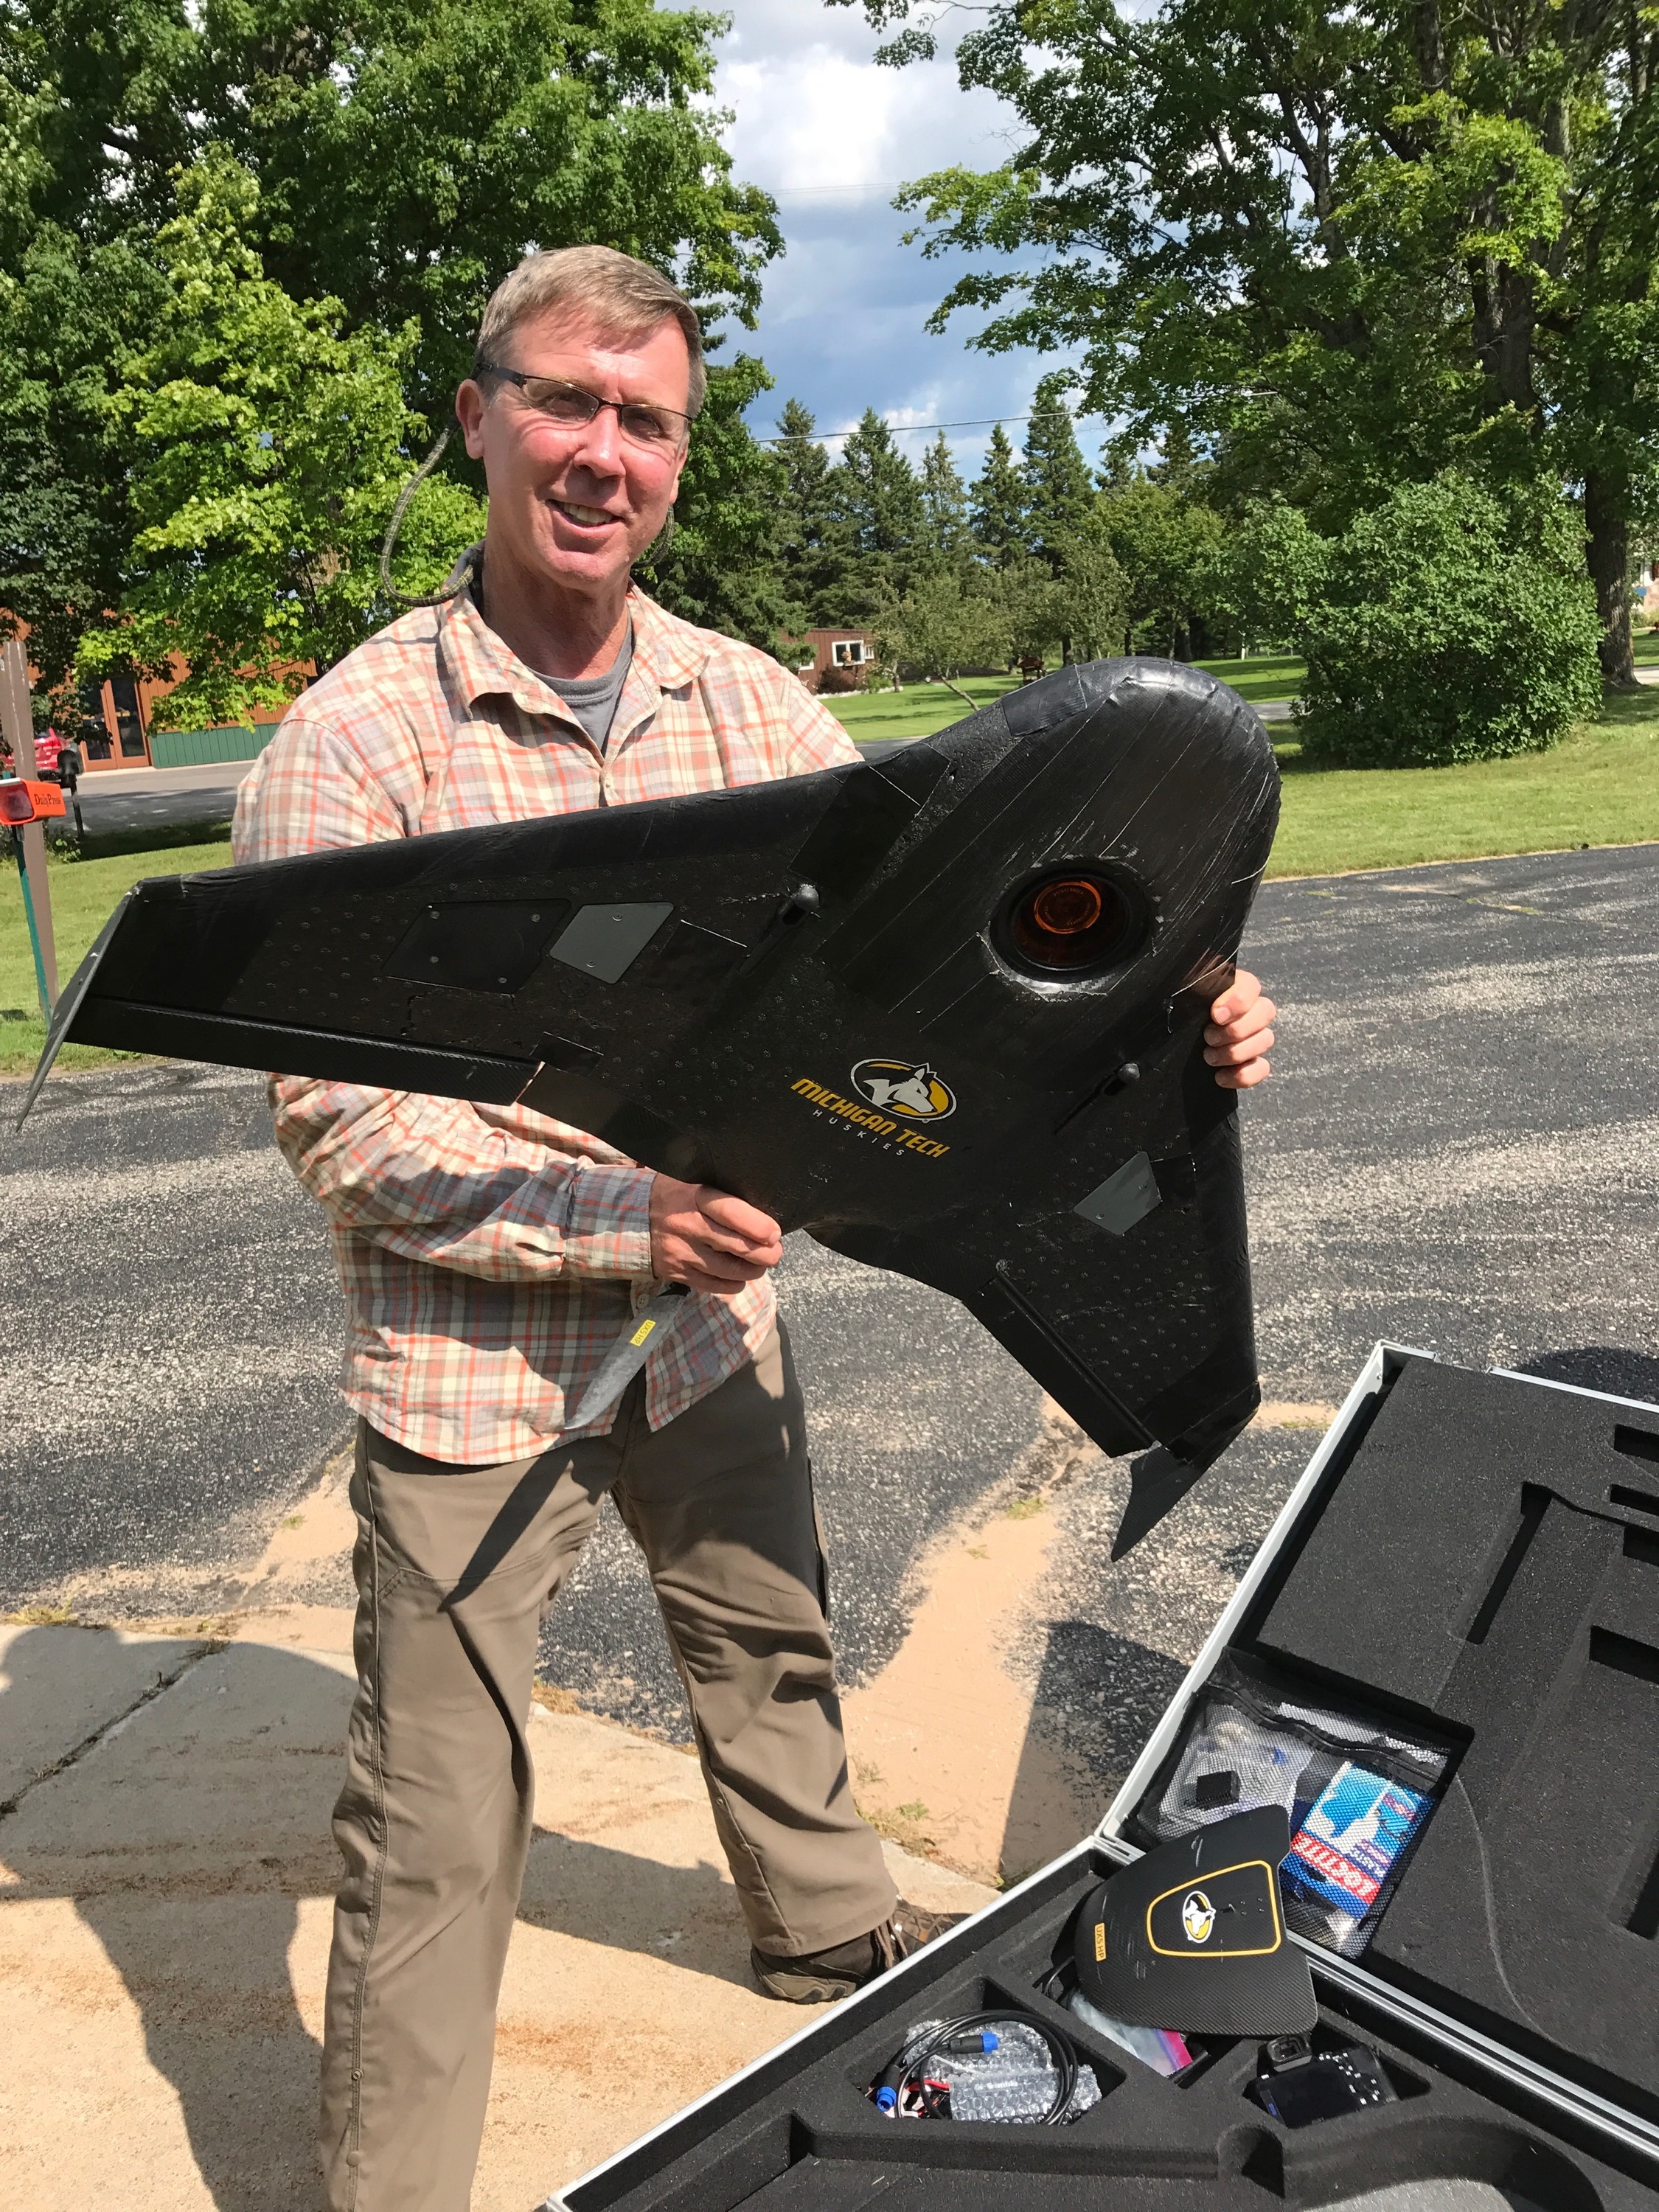 Dr. Curtis Edson, Assistant Professor of Remote Sensing and Geographic Information Systems at MTech,hold the UAV used in the drone flights over the Hiawatha National Forest. (Photo credit: US Forest Service.)